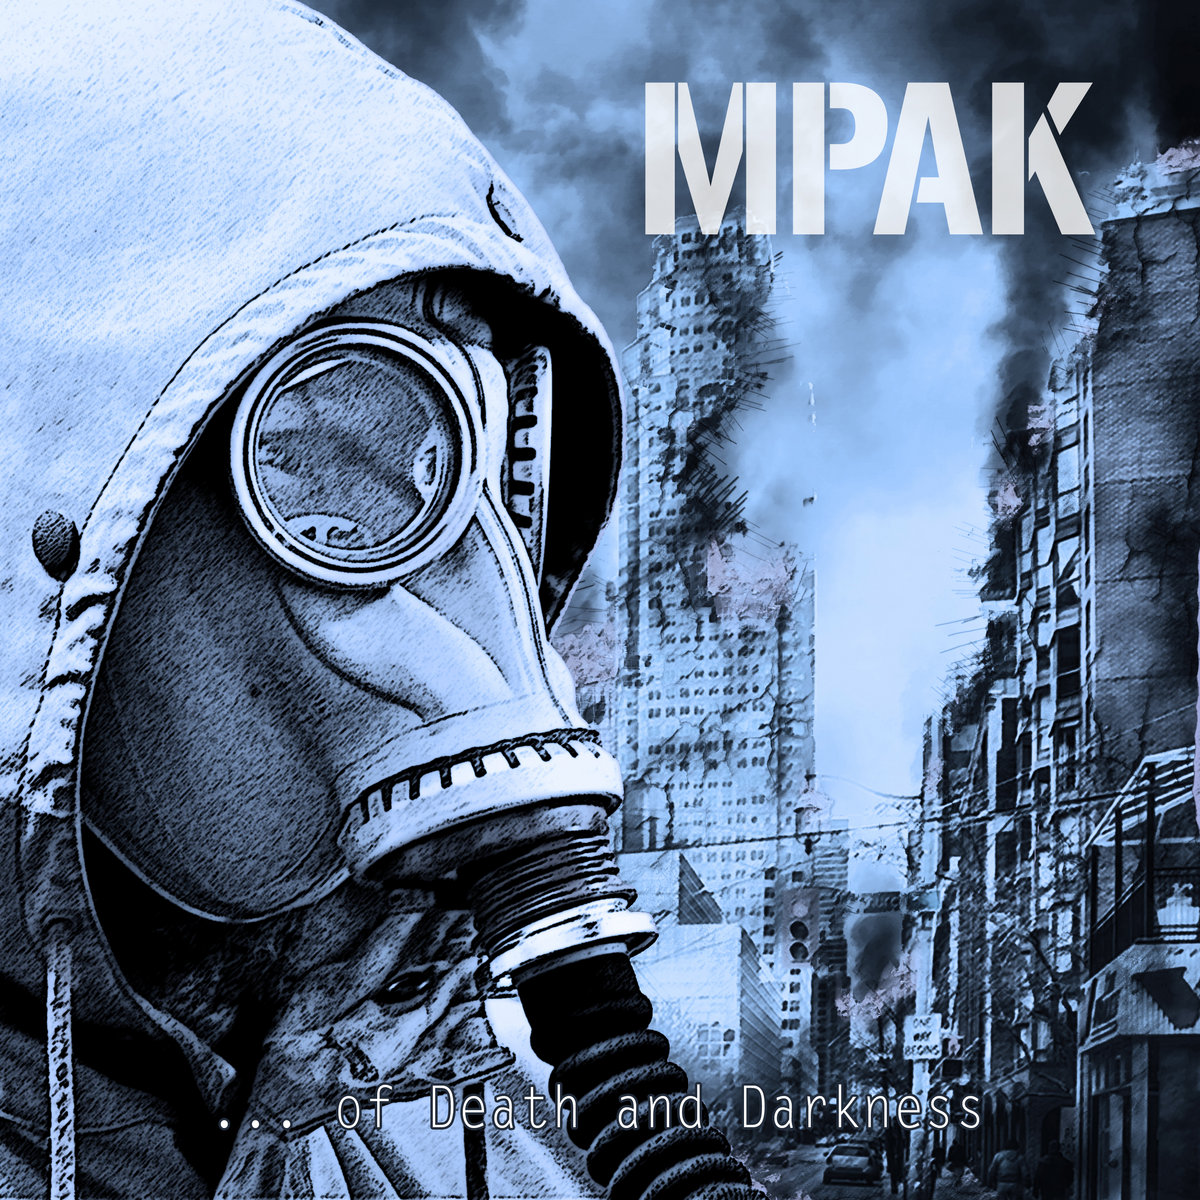 Mrak – Of Death And Darkness